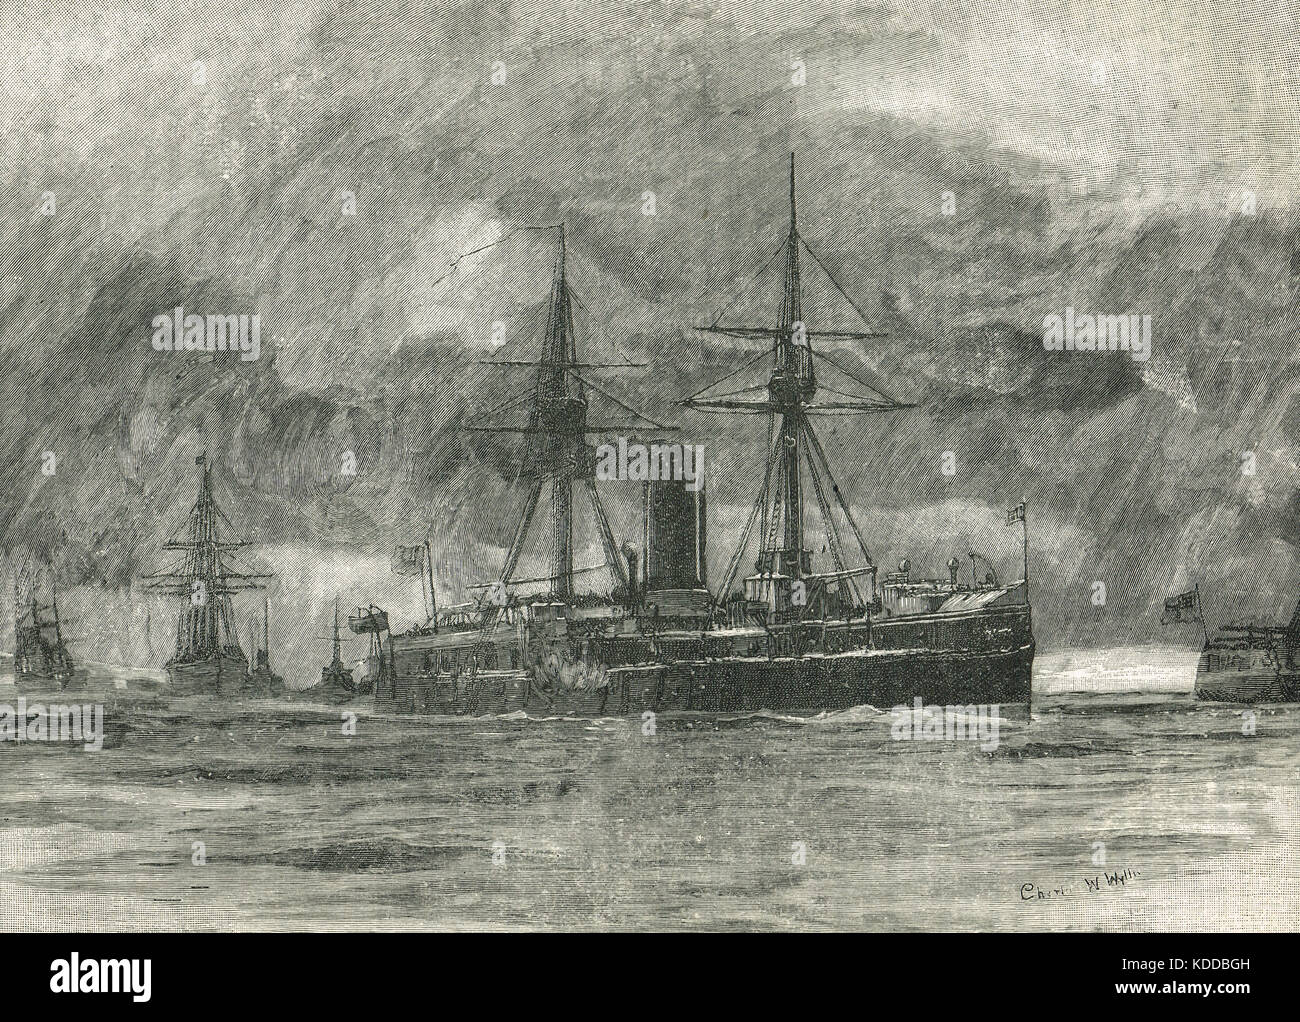 British fleet in the Dardanelles. The Mediterranean squadron transit of the Dardanelles straits on 14 February 1878. A show of force ordered by Disraeli, during the Russo-Turkish War 1877–1878 Stock Photo